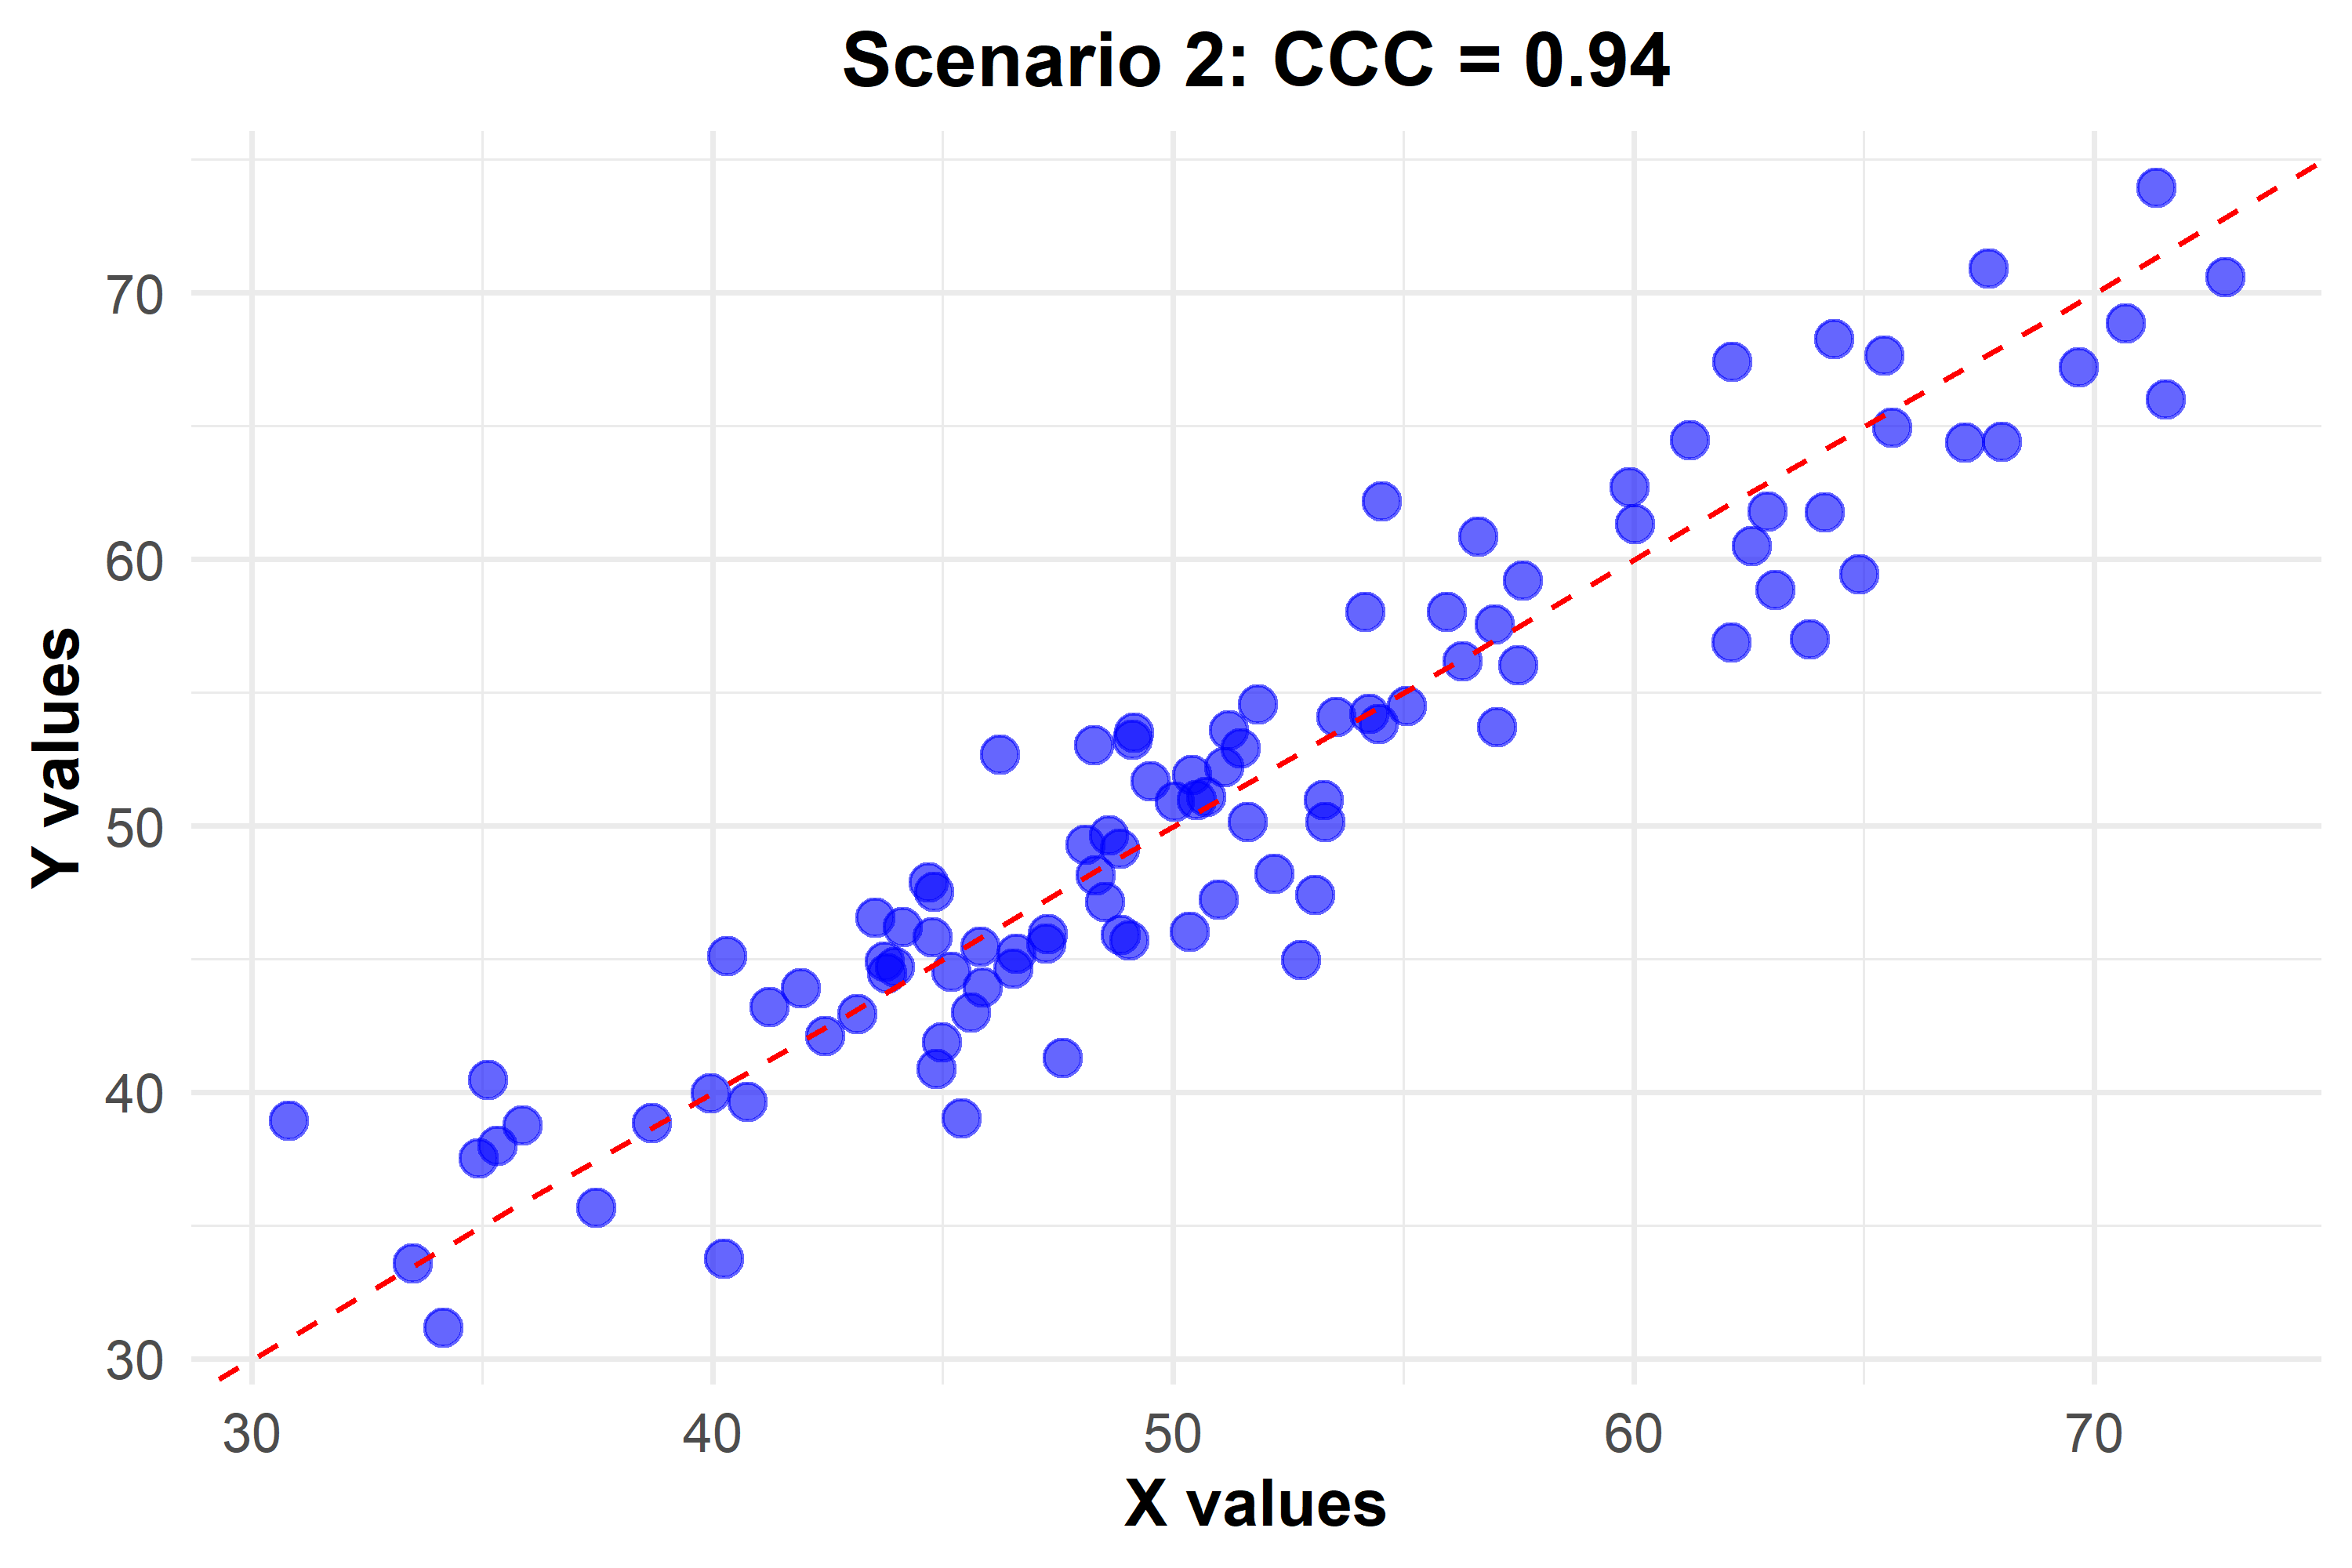 Scenario 2 - Strong linear relationship and high concordance with CCC at 0.95. The dashed line indicates the line of perfect agreement